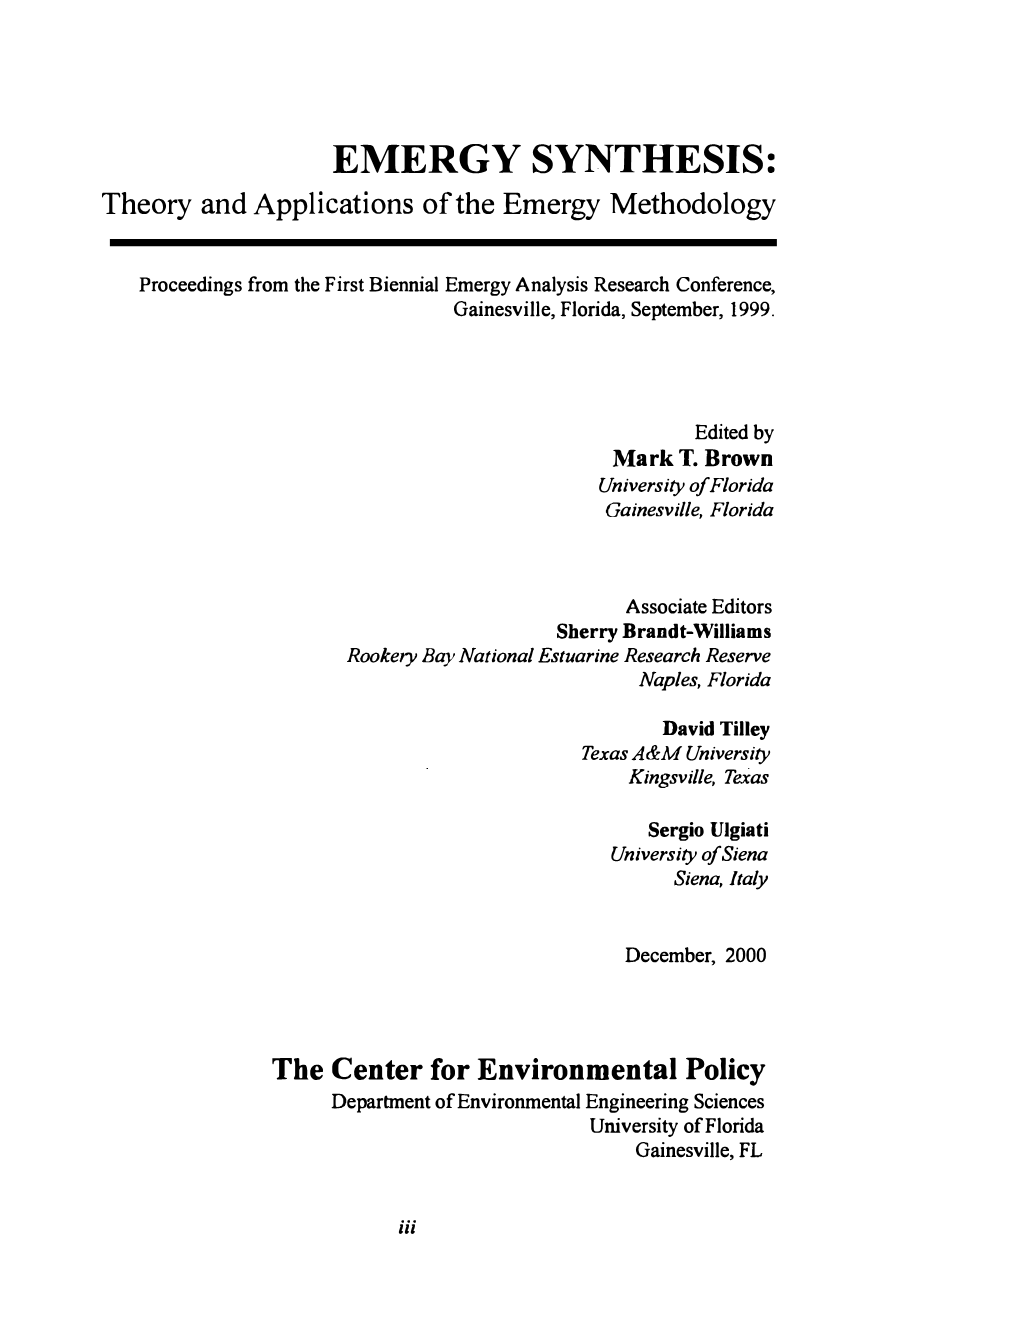 EMERGY SYNTHESIS: Theory and Applications of the Emergy Methodology